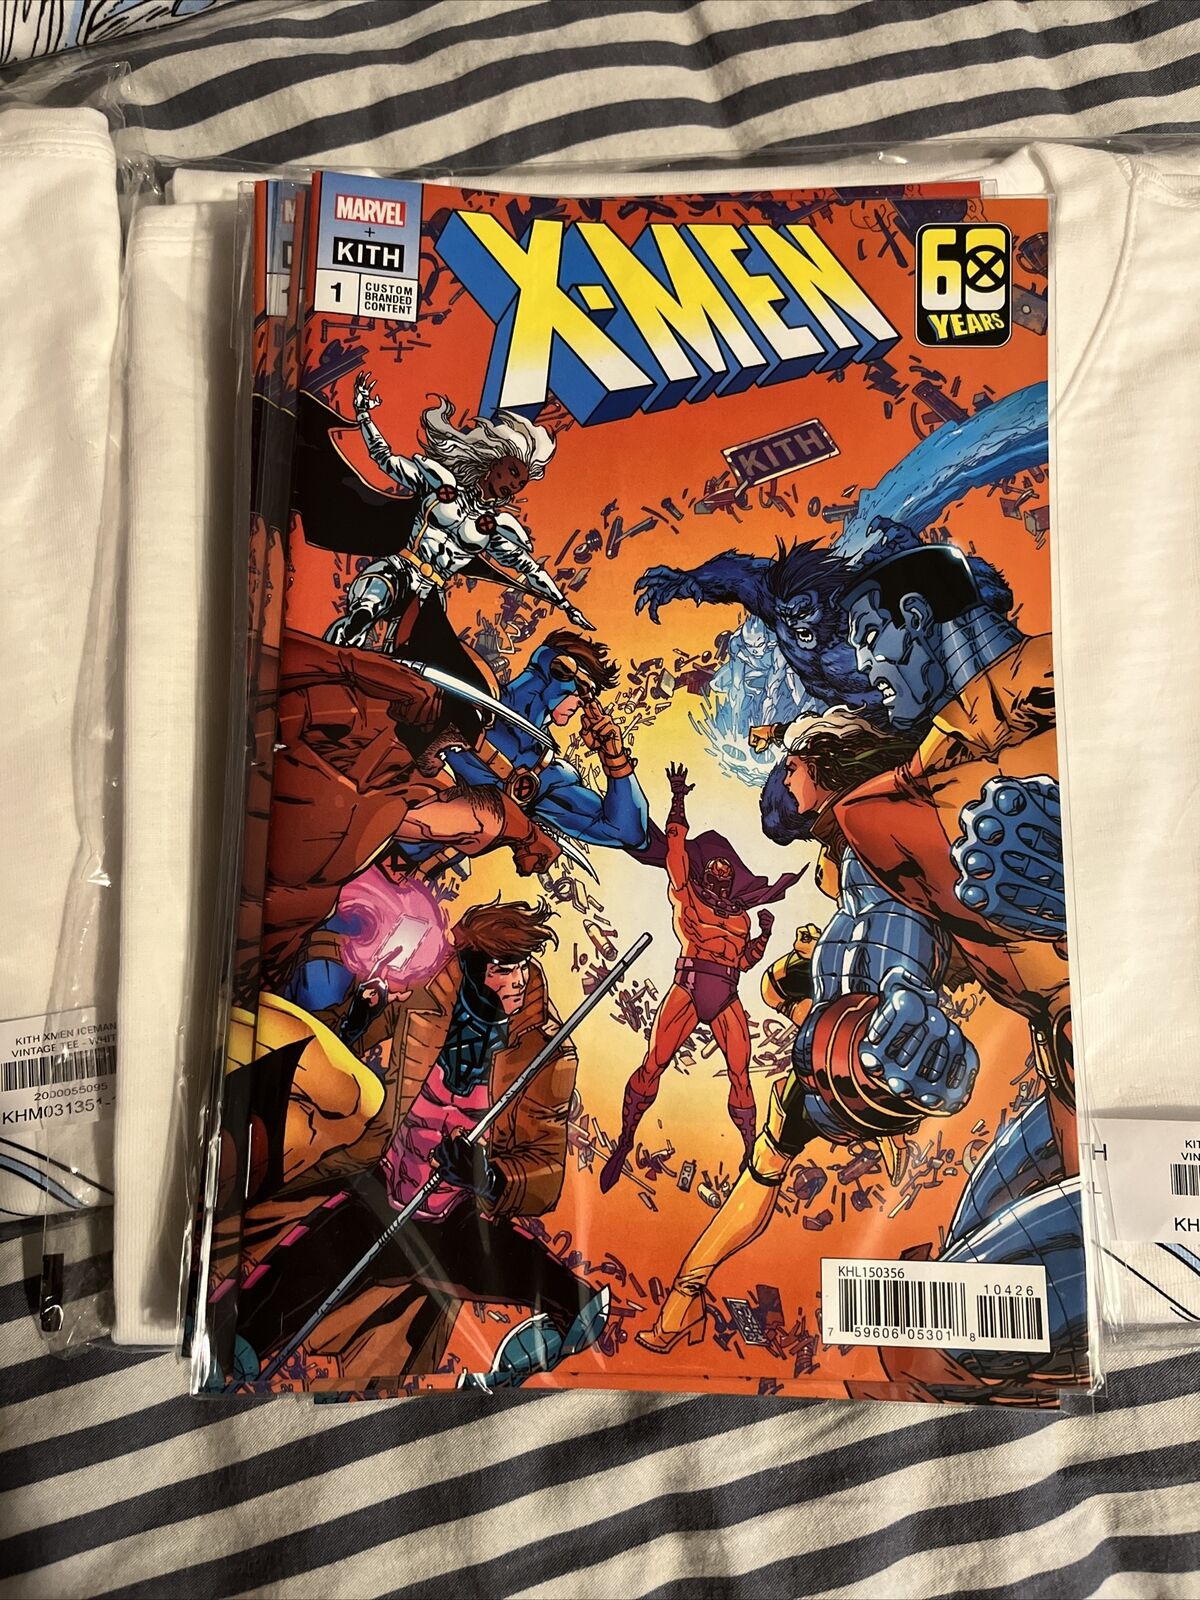 Kith x Marvel X-Men 60th Anniversary #1 Comic Book SDCC 2023 New Limited